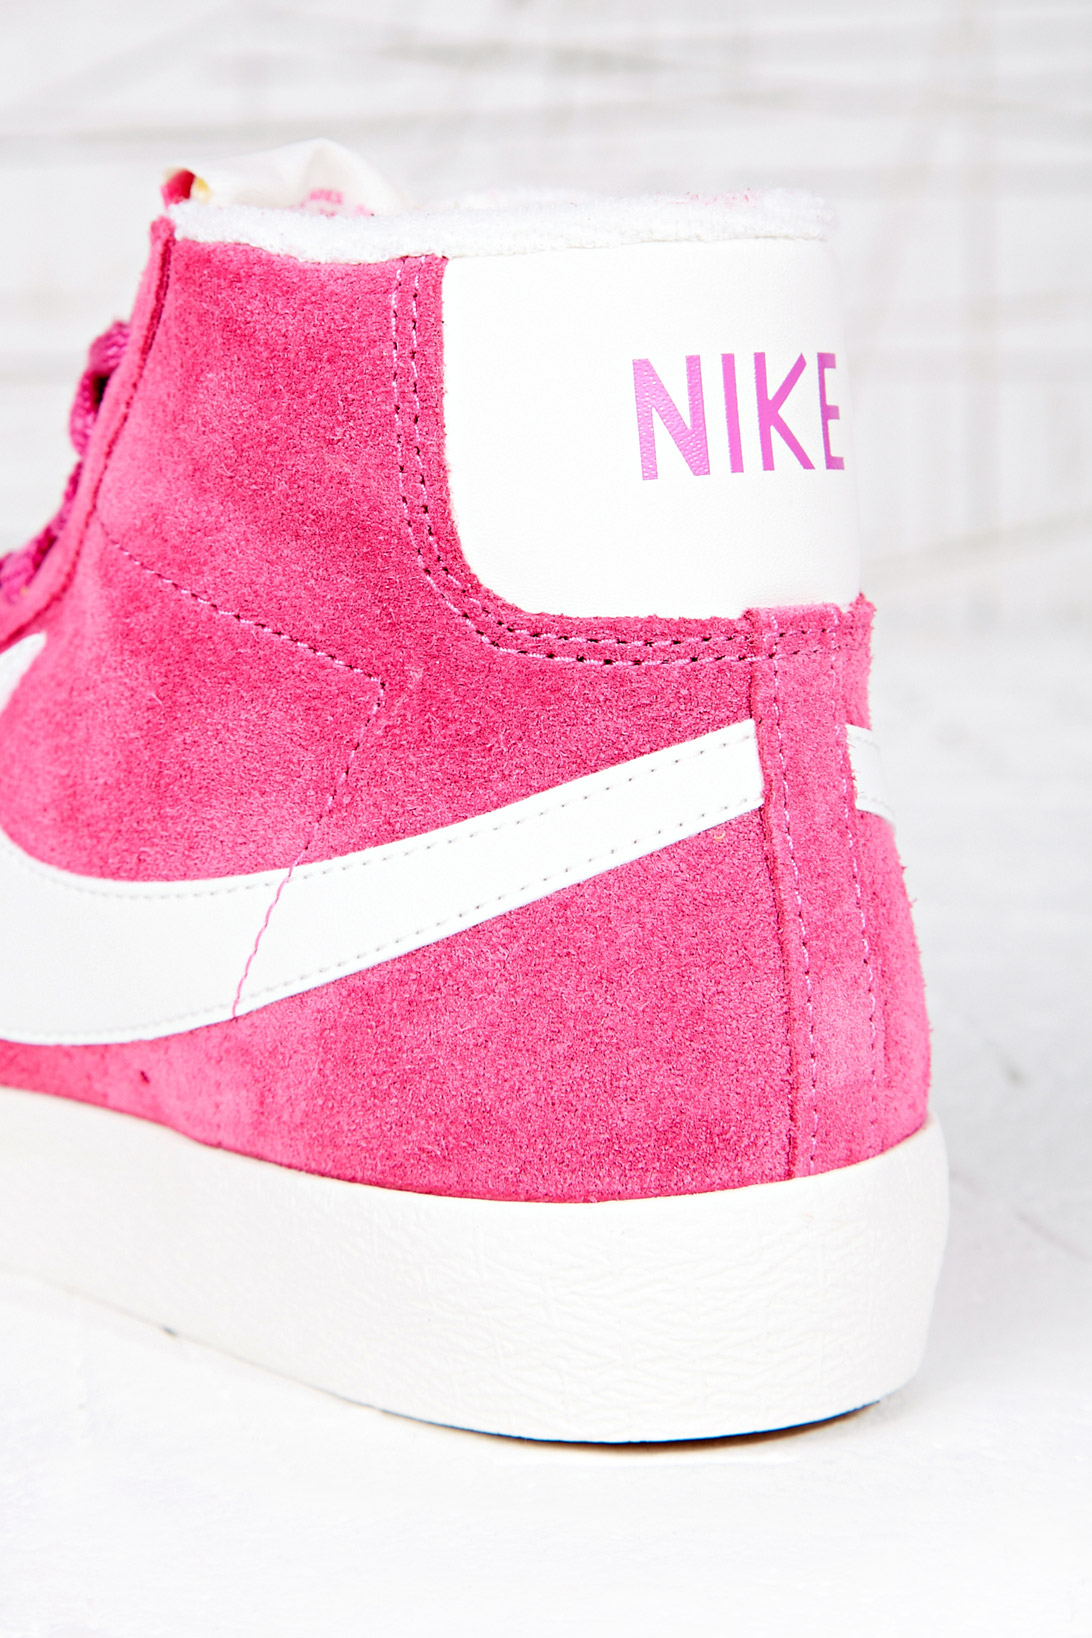 pink nike high top shoes